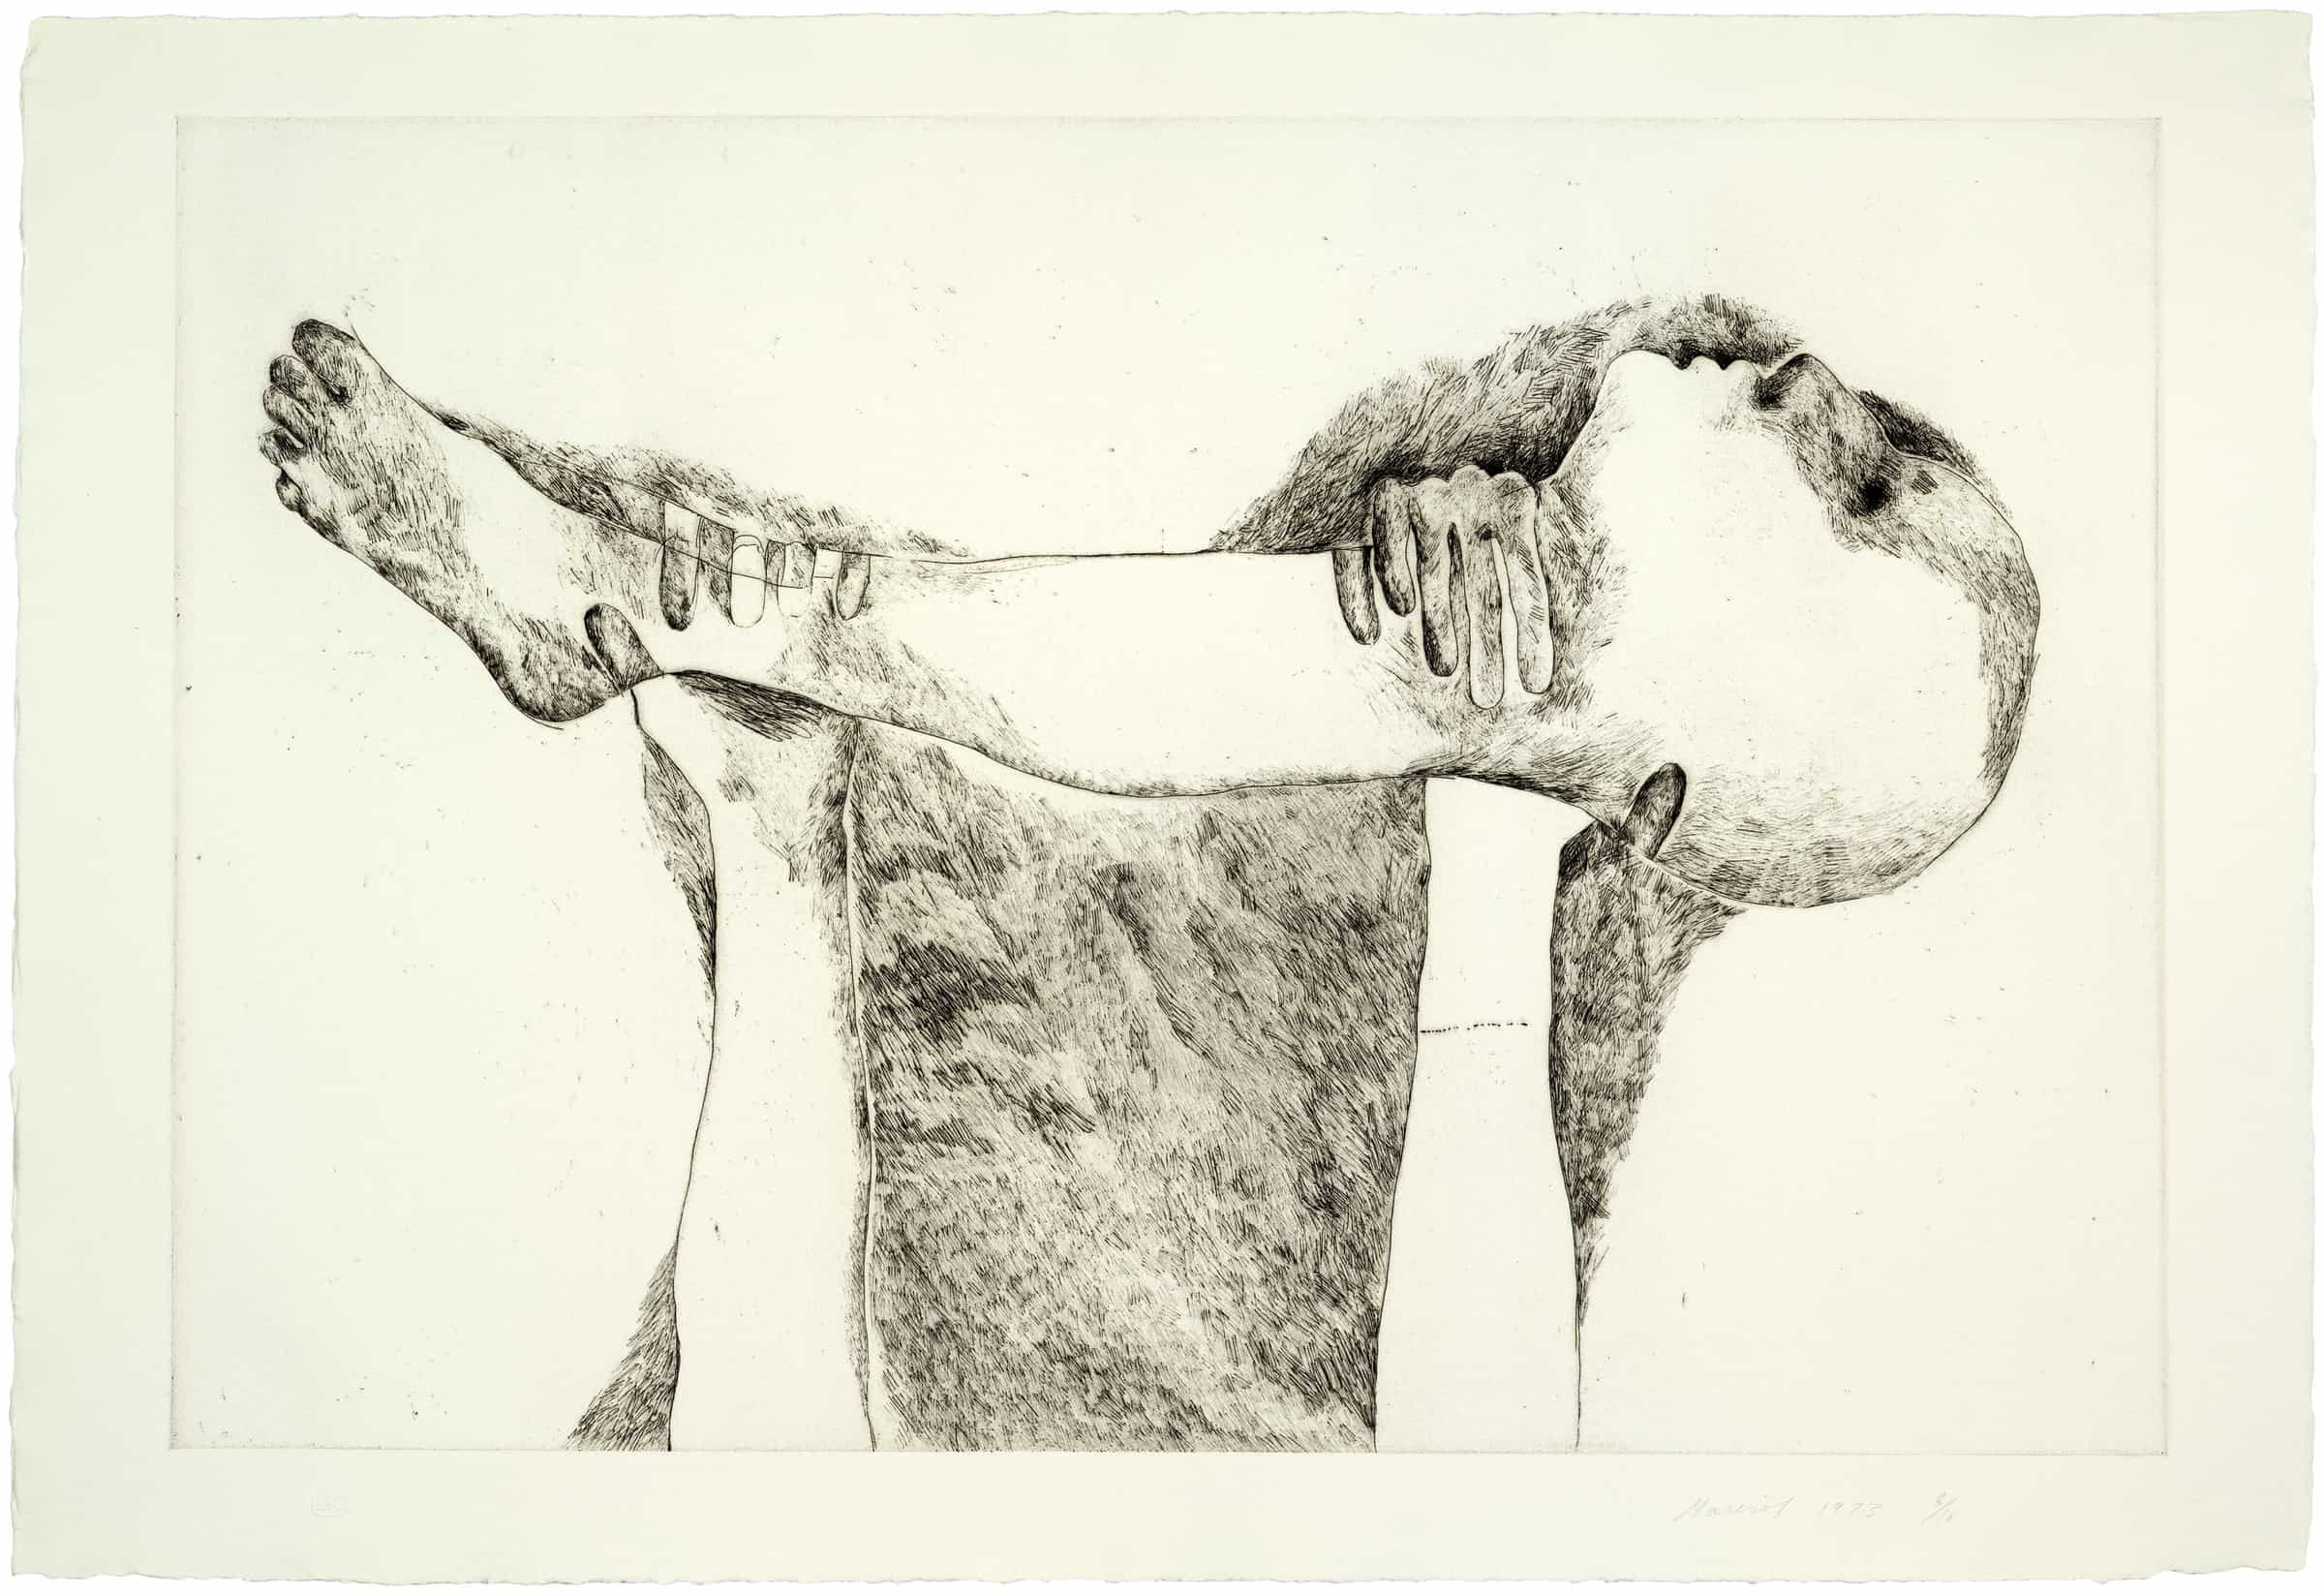 Marisol, The Death of Head and Leg, 1969-73